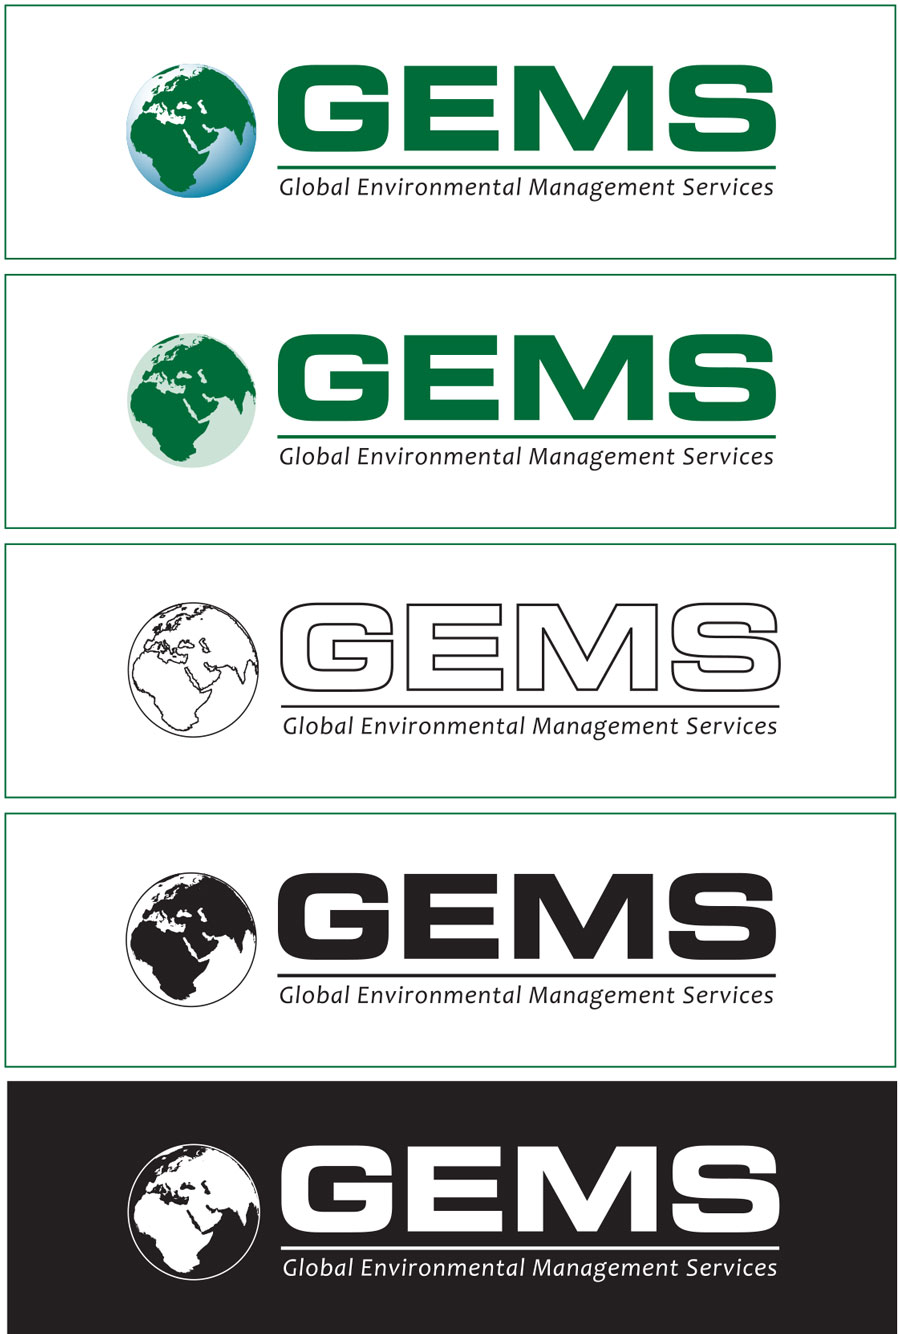 Approved versions of GEMS logo